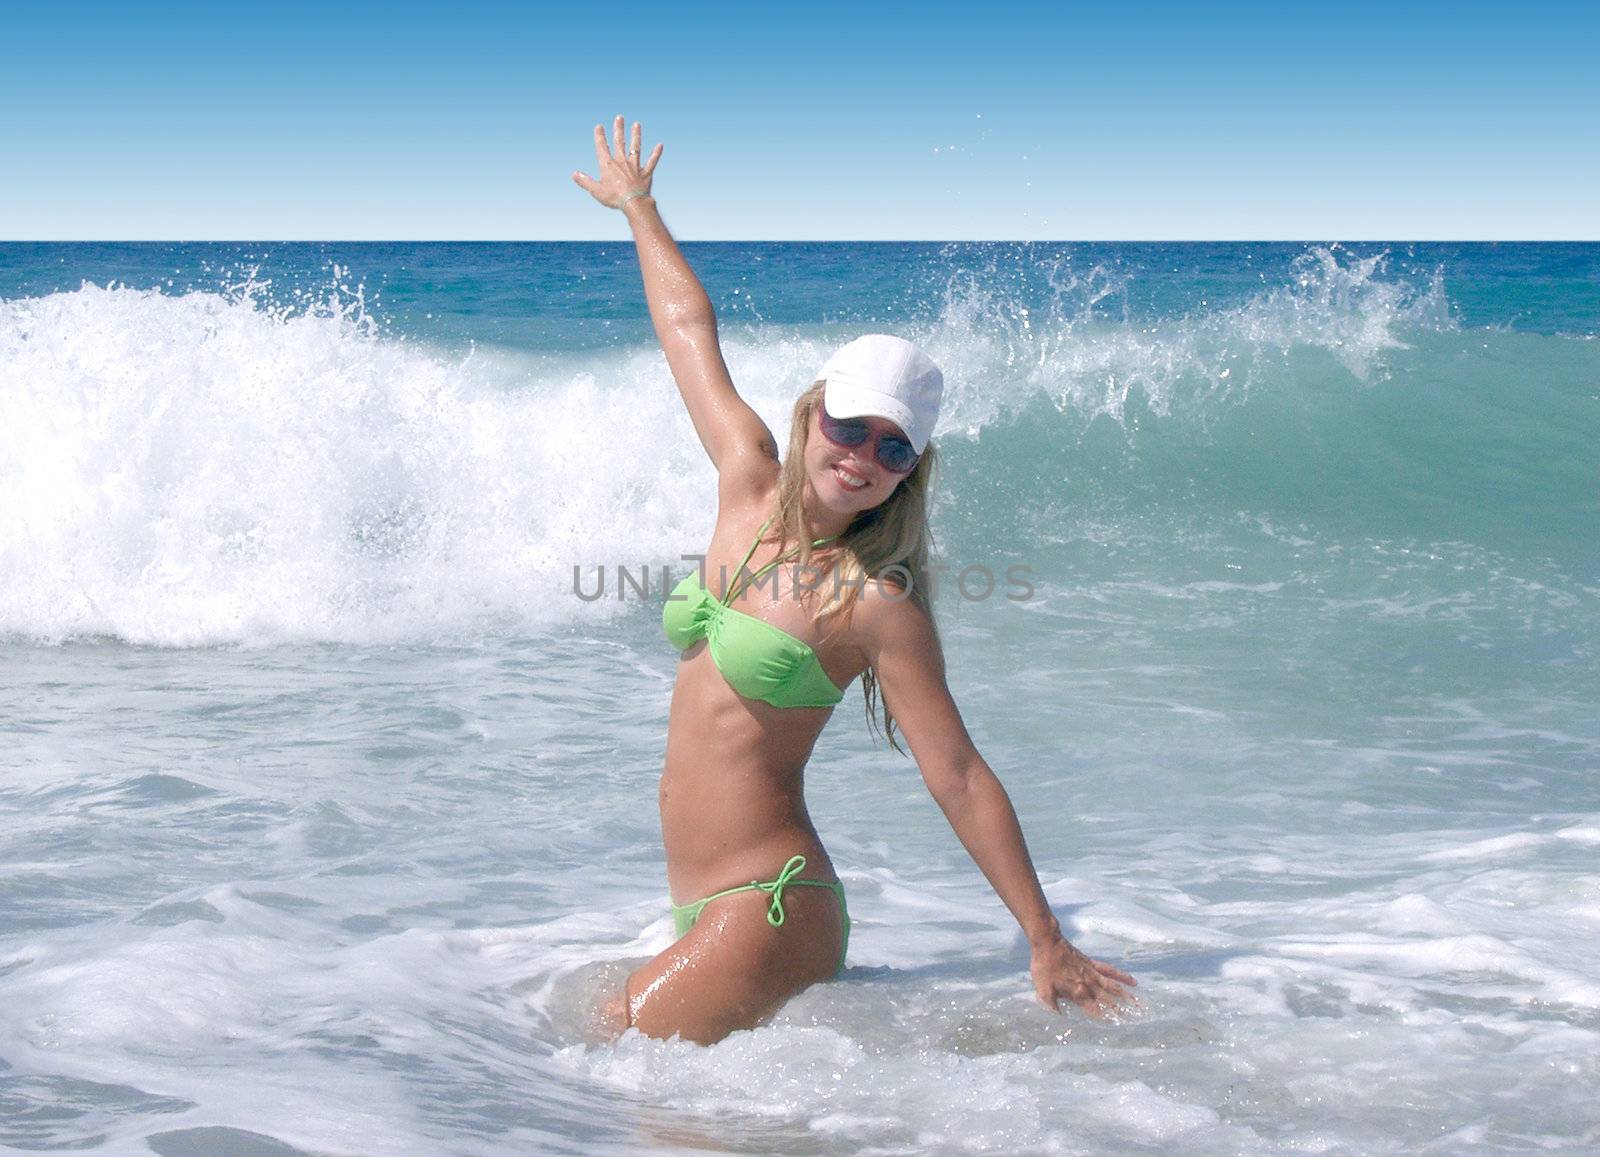 blond woman posing on the beach, standing with raised hand  by svtrotof